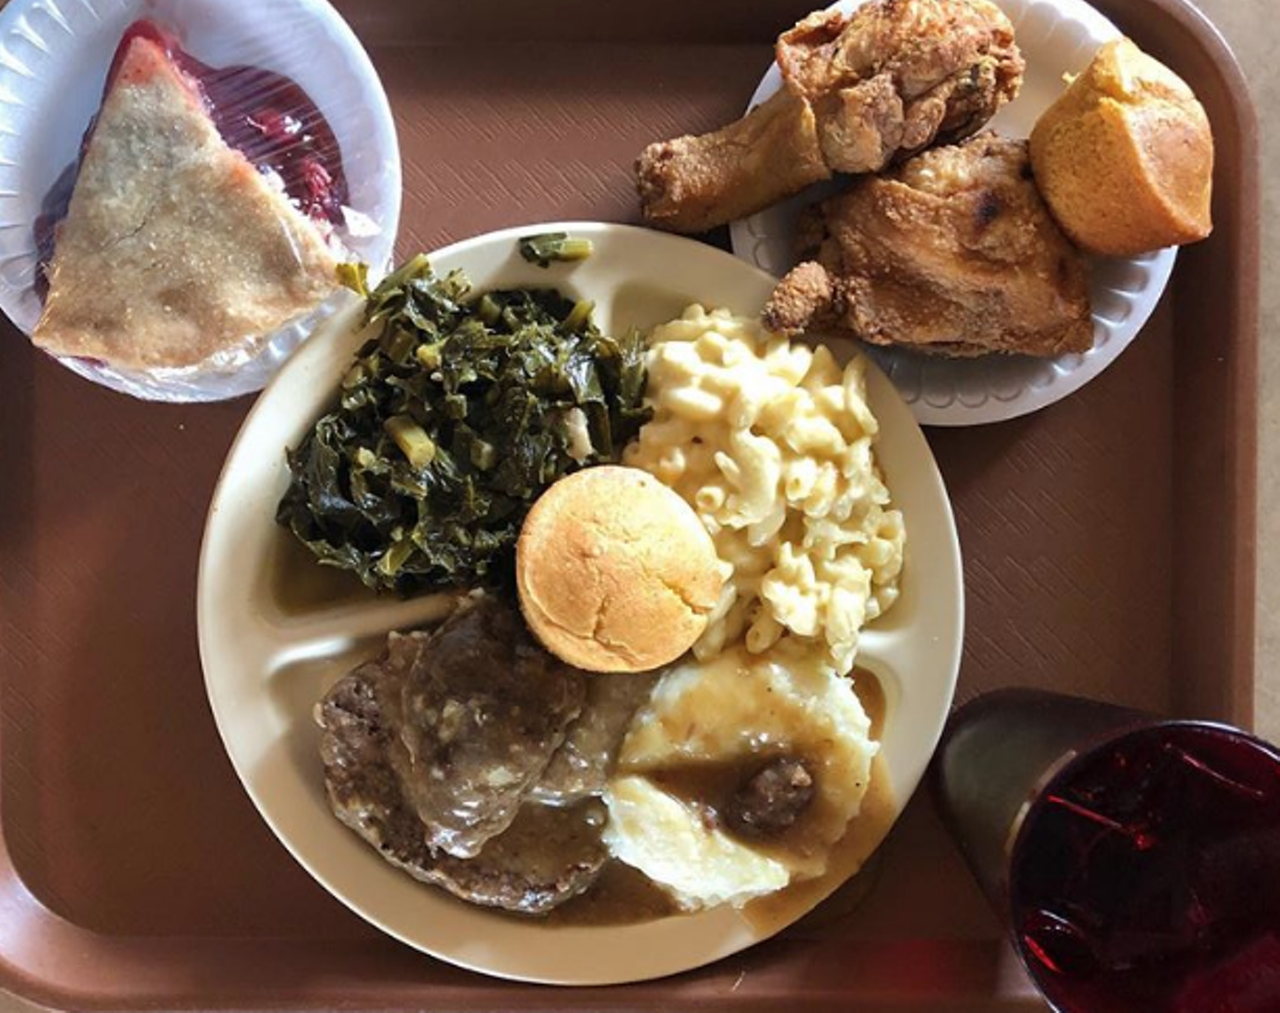 Mr. and Mrs. G’s Home Cooking
2222 S WW White Road, (210) 359-0002
William and Addie Gardner, better known as Mr. and Mrs. G, blessed us when they opened their restaurant way back in 1990. Since then, locals have been able to get a taste of properly-made, authentic soul food – from fried chicken and black-eyed peas to plenty of desserts like banana pudding and peach cobbler. Mr. and Mrs. G’s power extends even further than the Alamo City, with the eatery gaining national attention with nods from USA Today. Addie passed away in September 2017.
Photo via Instagram / jesselizarraras